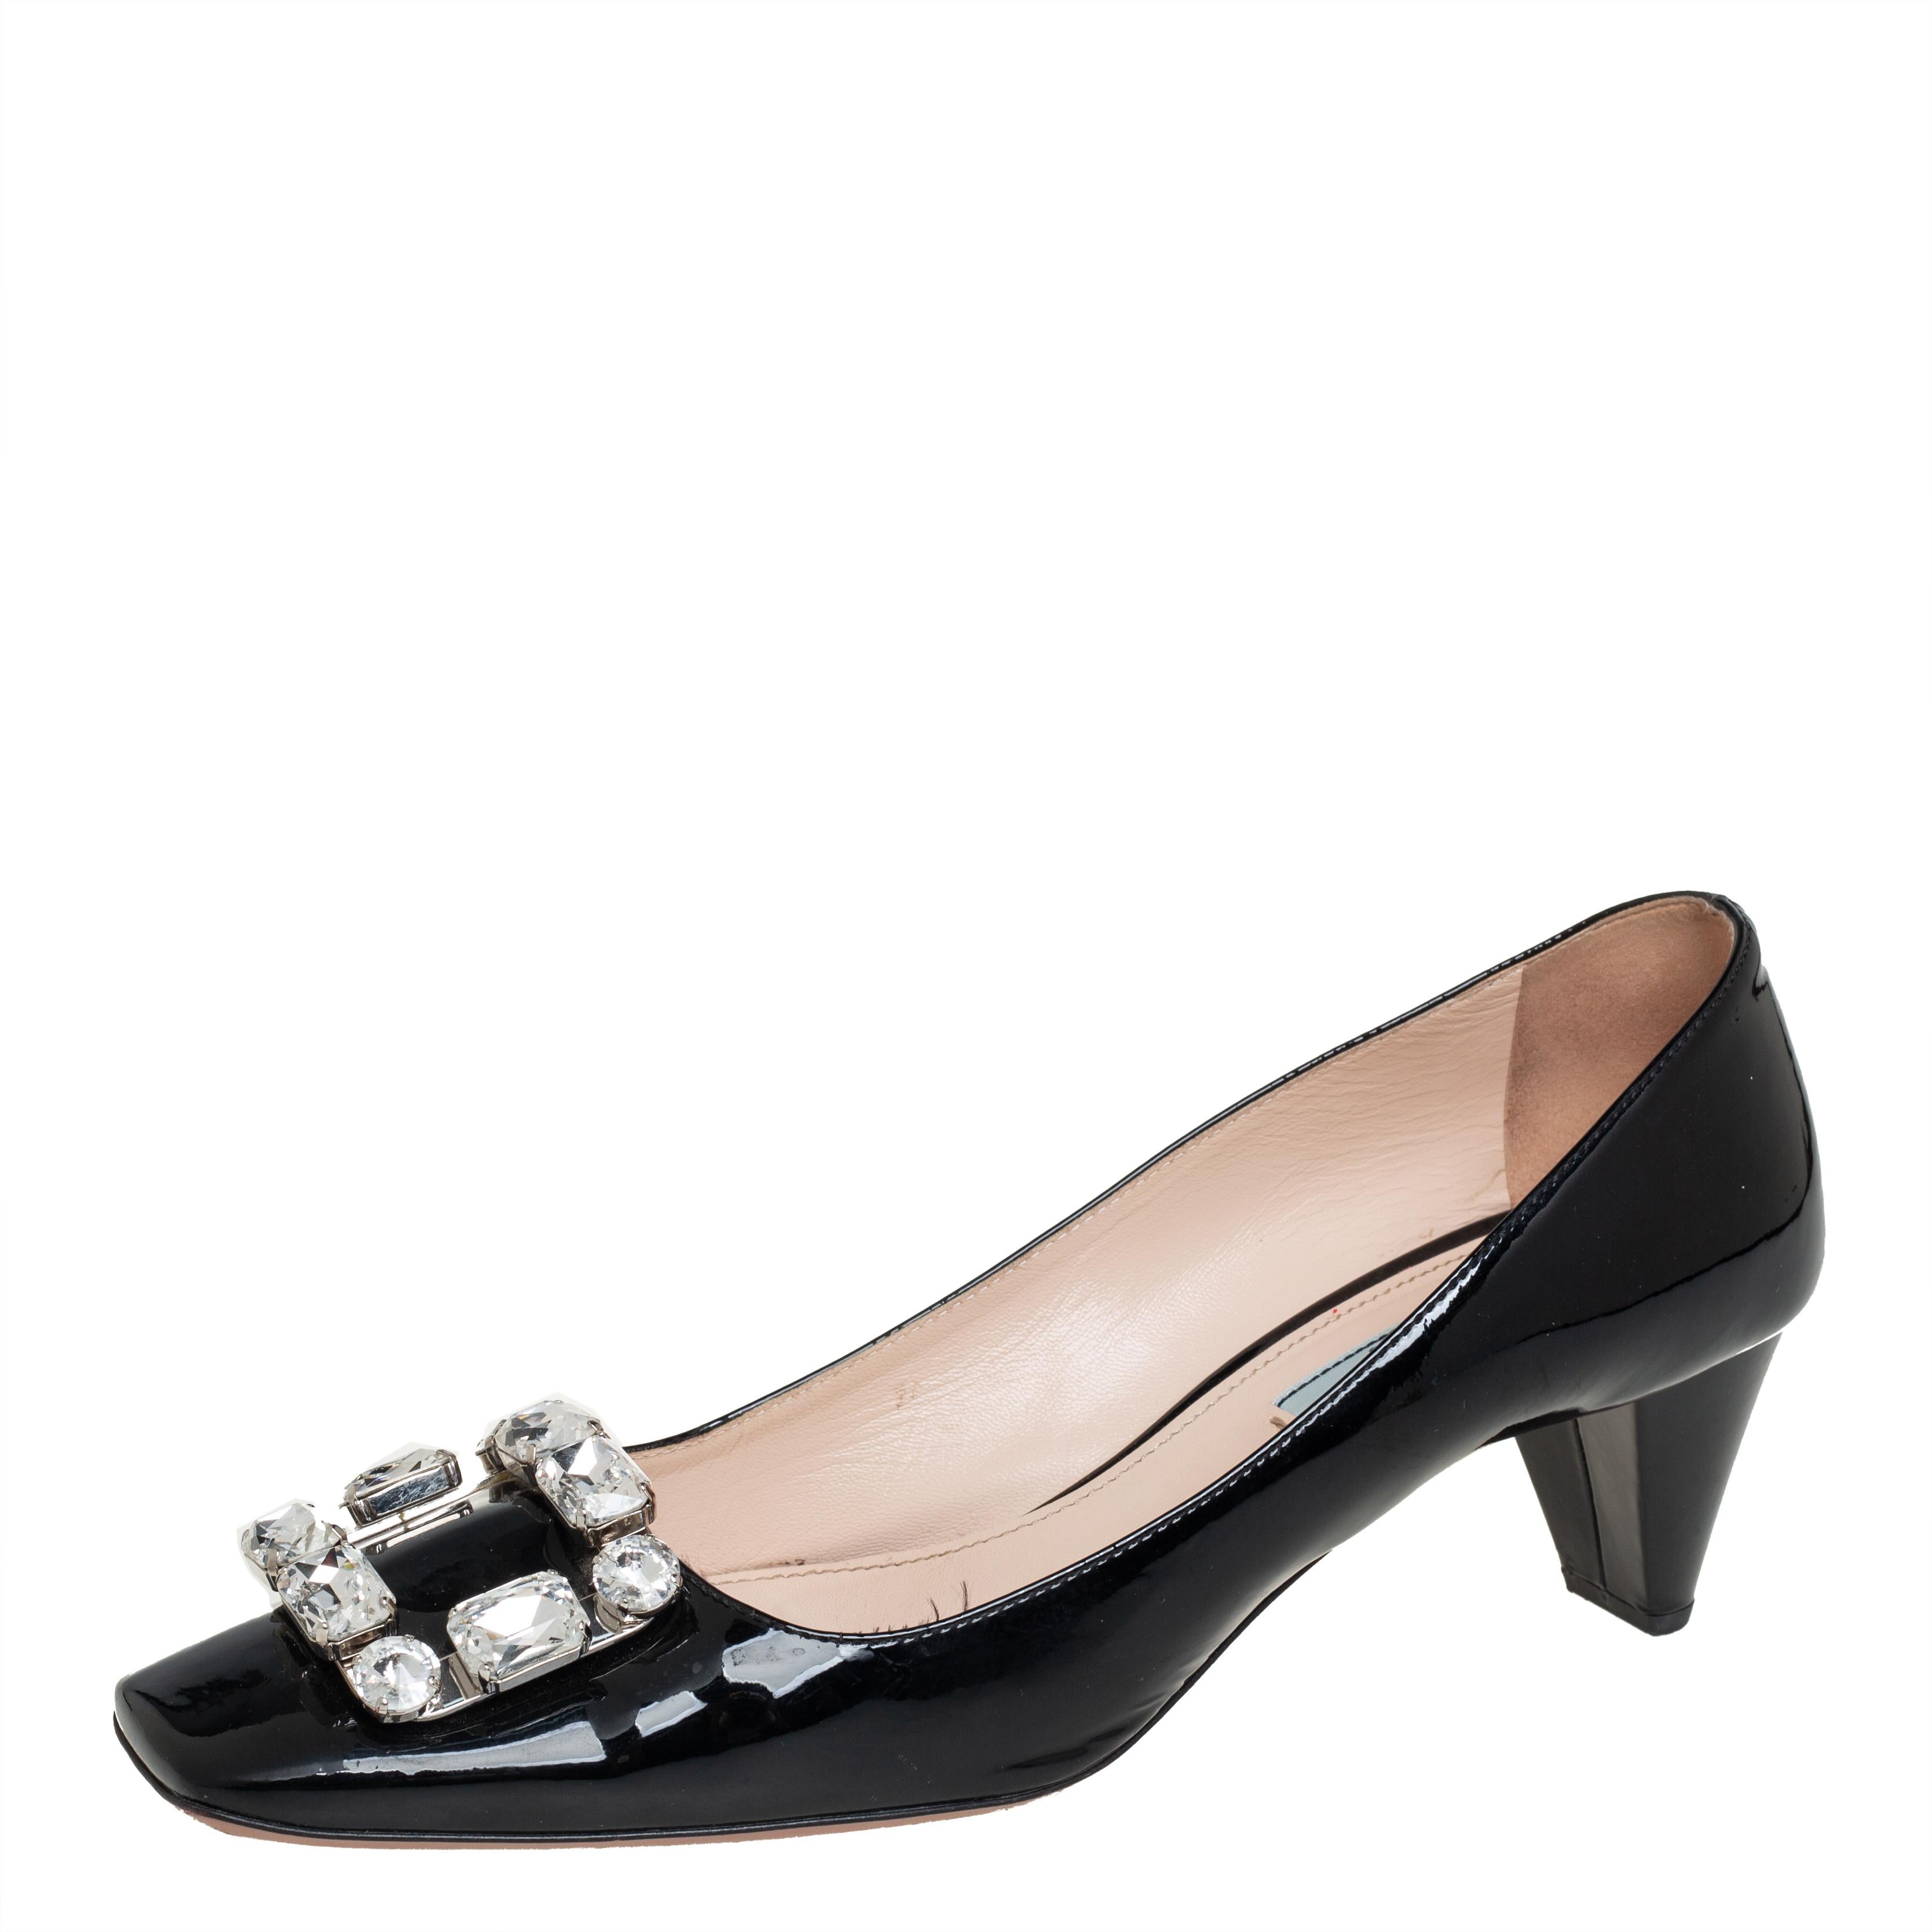 Add this exquisite pair of Prada pumps to lend an added element of comfort. Feel beautiful and be comfortable while flaunting these patent leather pumps, enhanced with crystal embellished buckle detail on the vamps. Upgrade your everyday look by